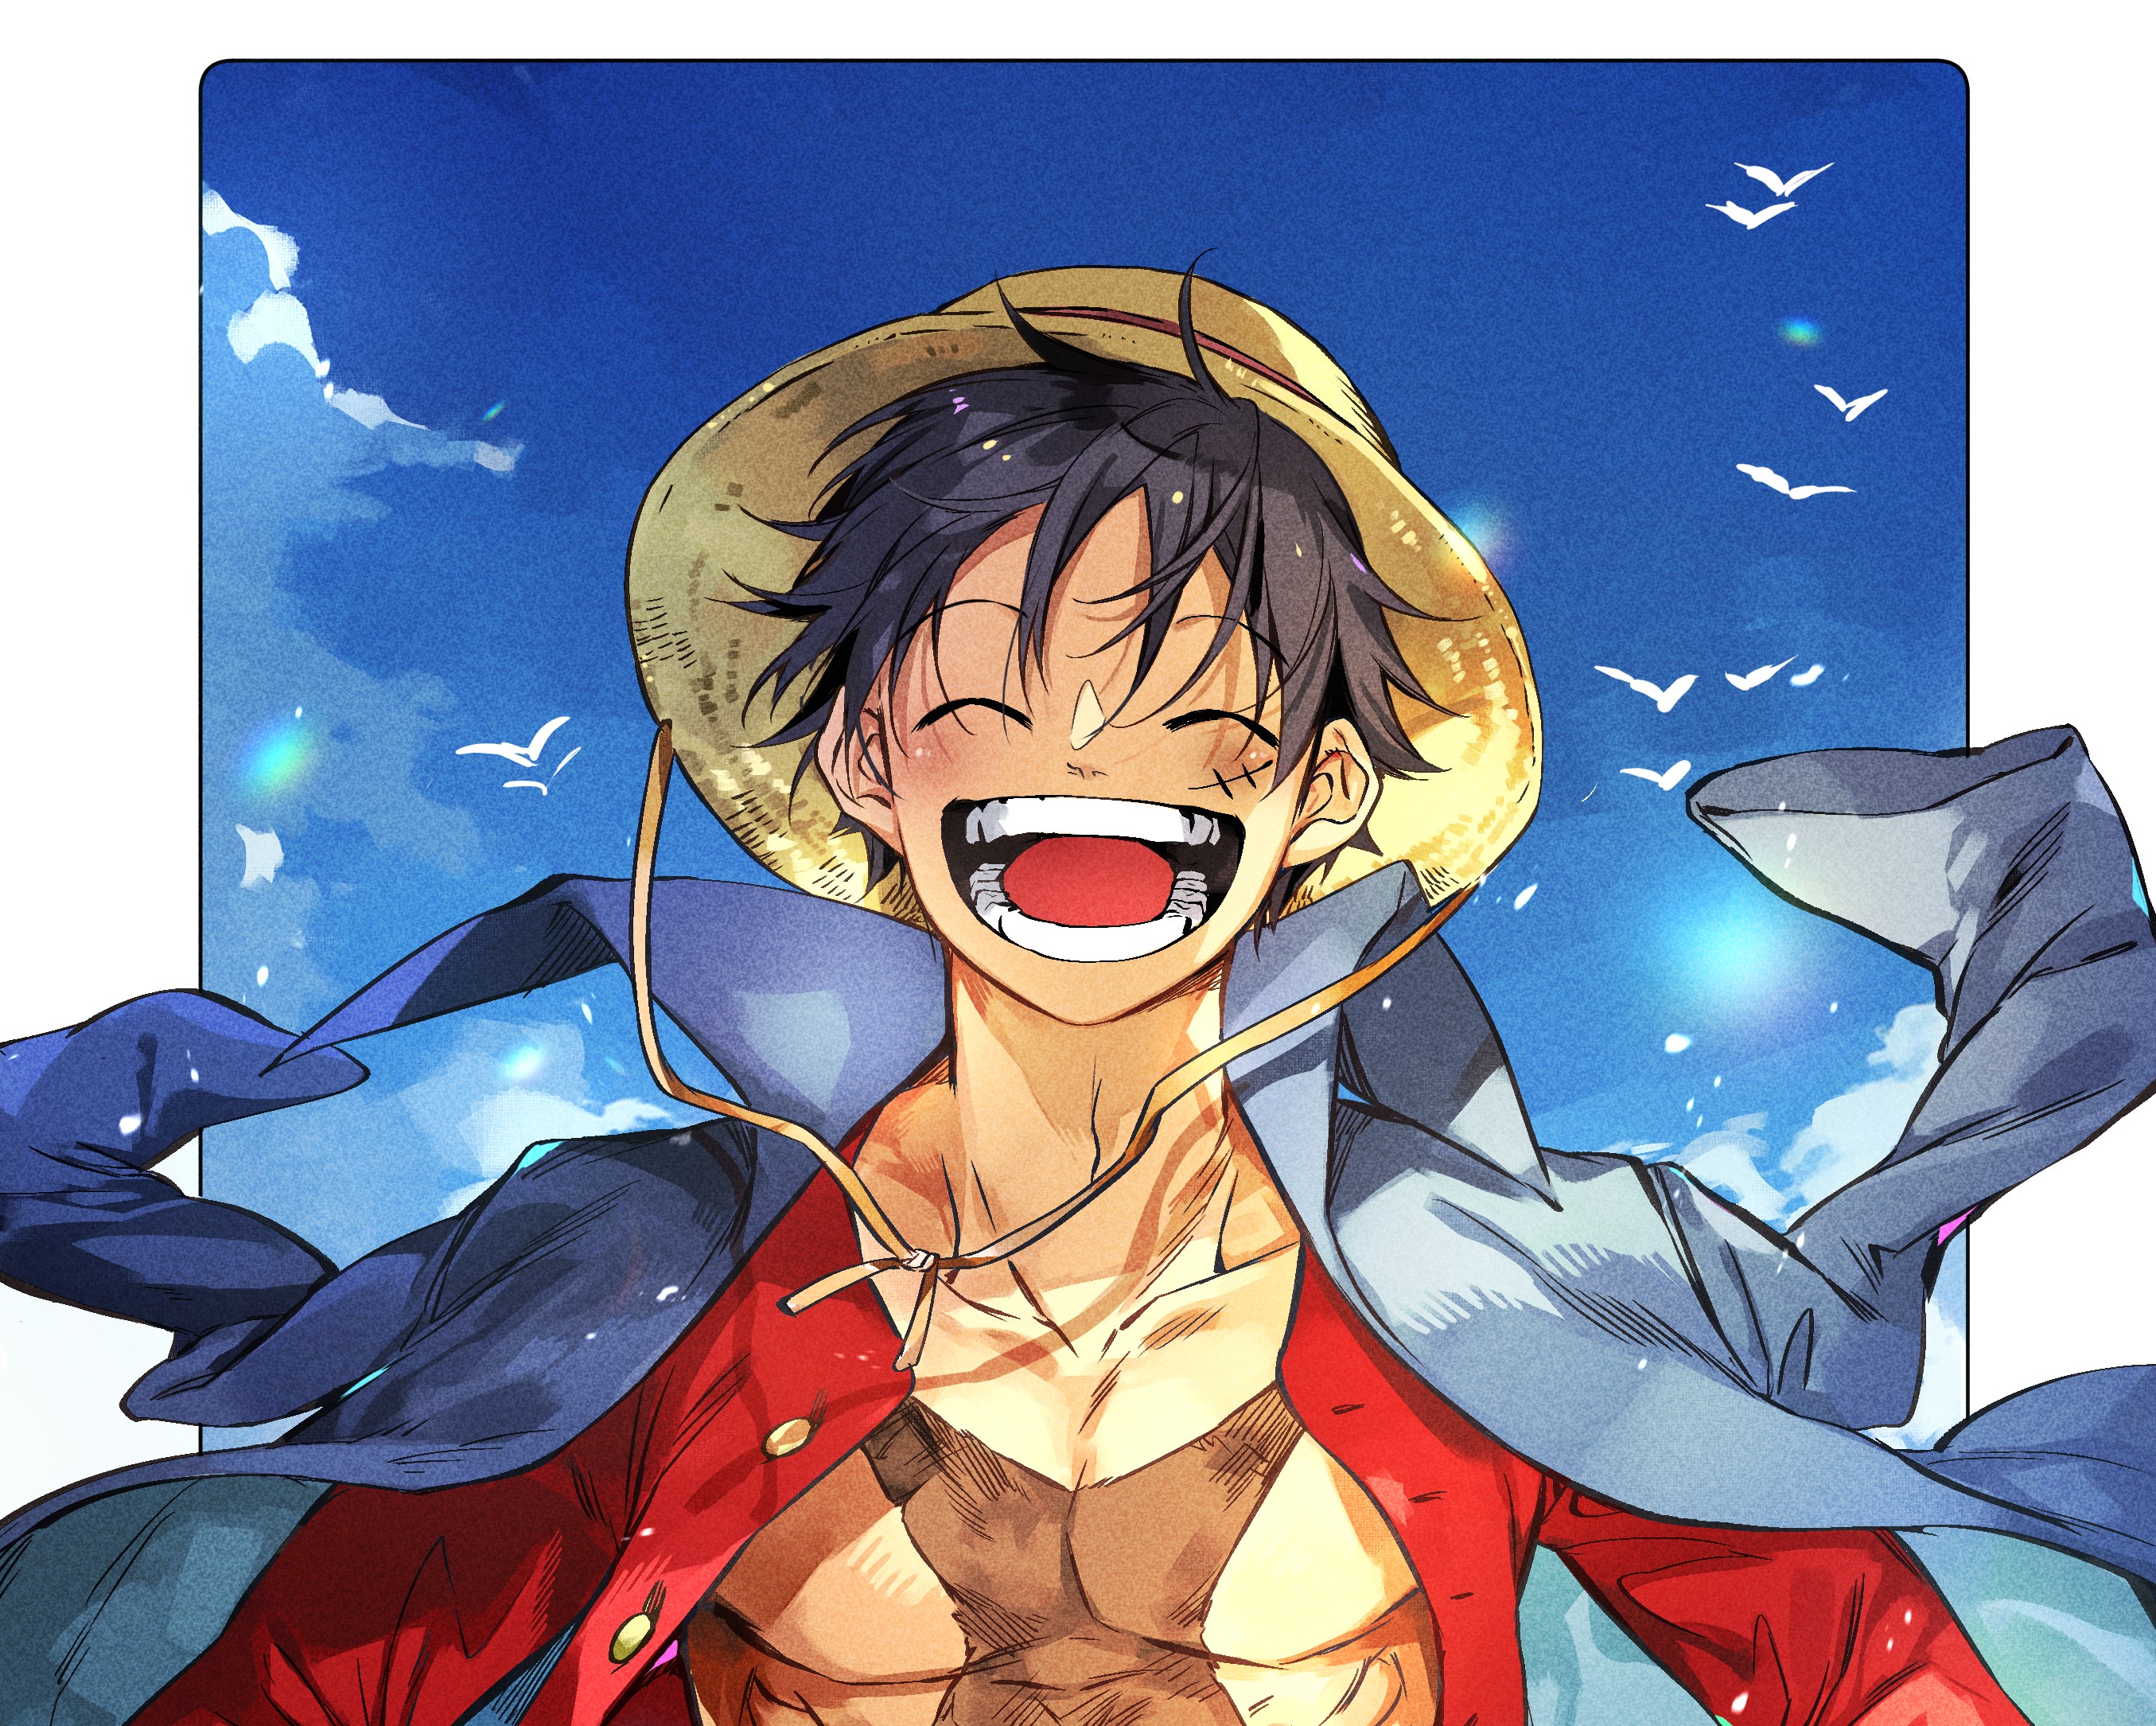 Top 999+ Luffy Pfp Wallpaper Full HD, 4K✓Free to Use